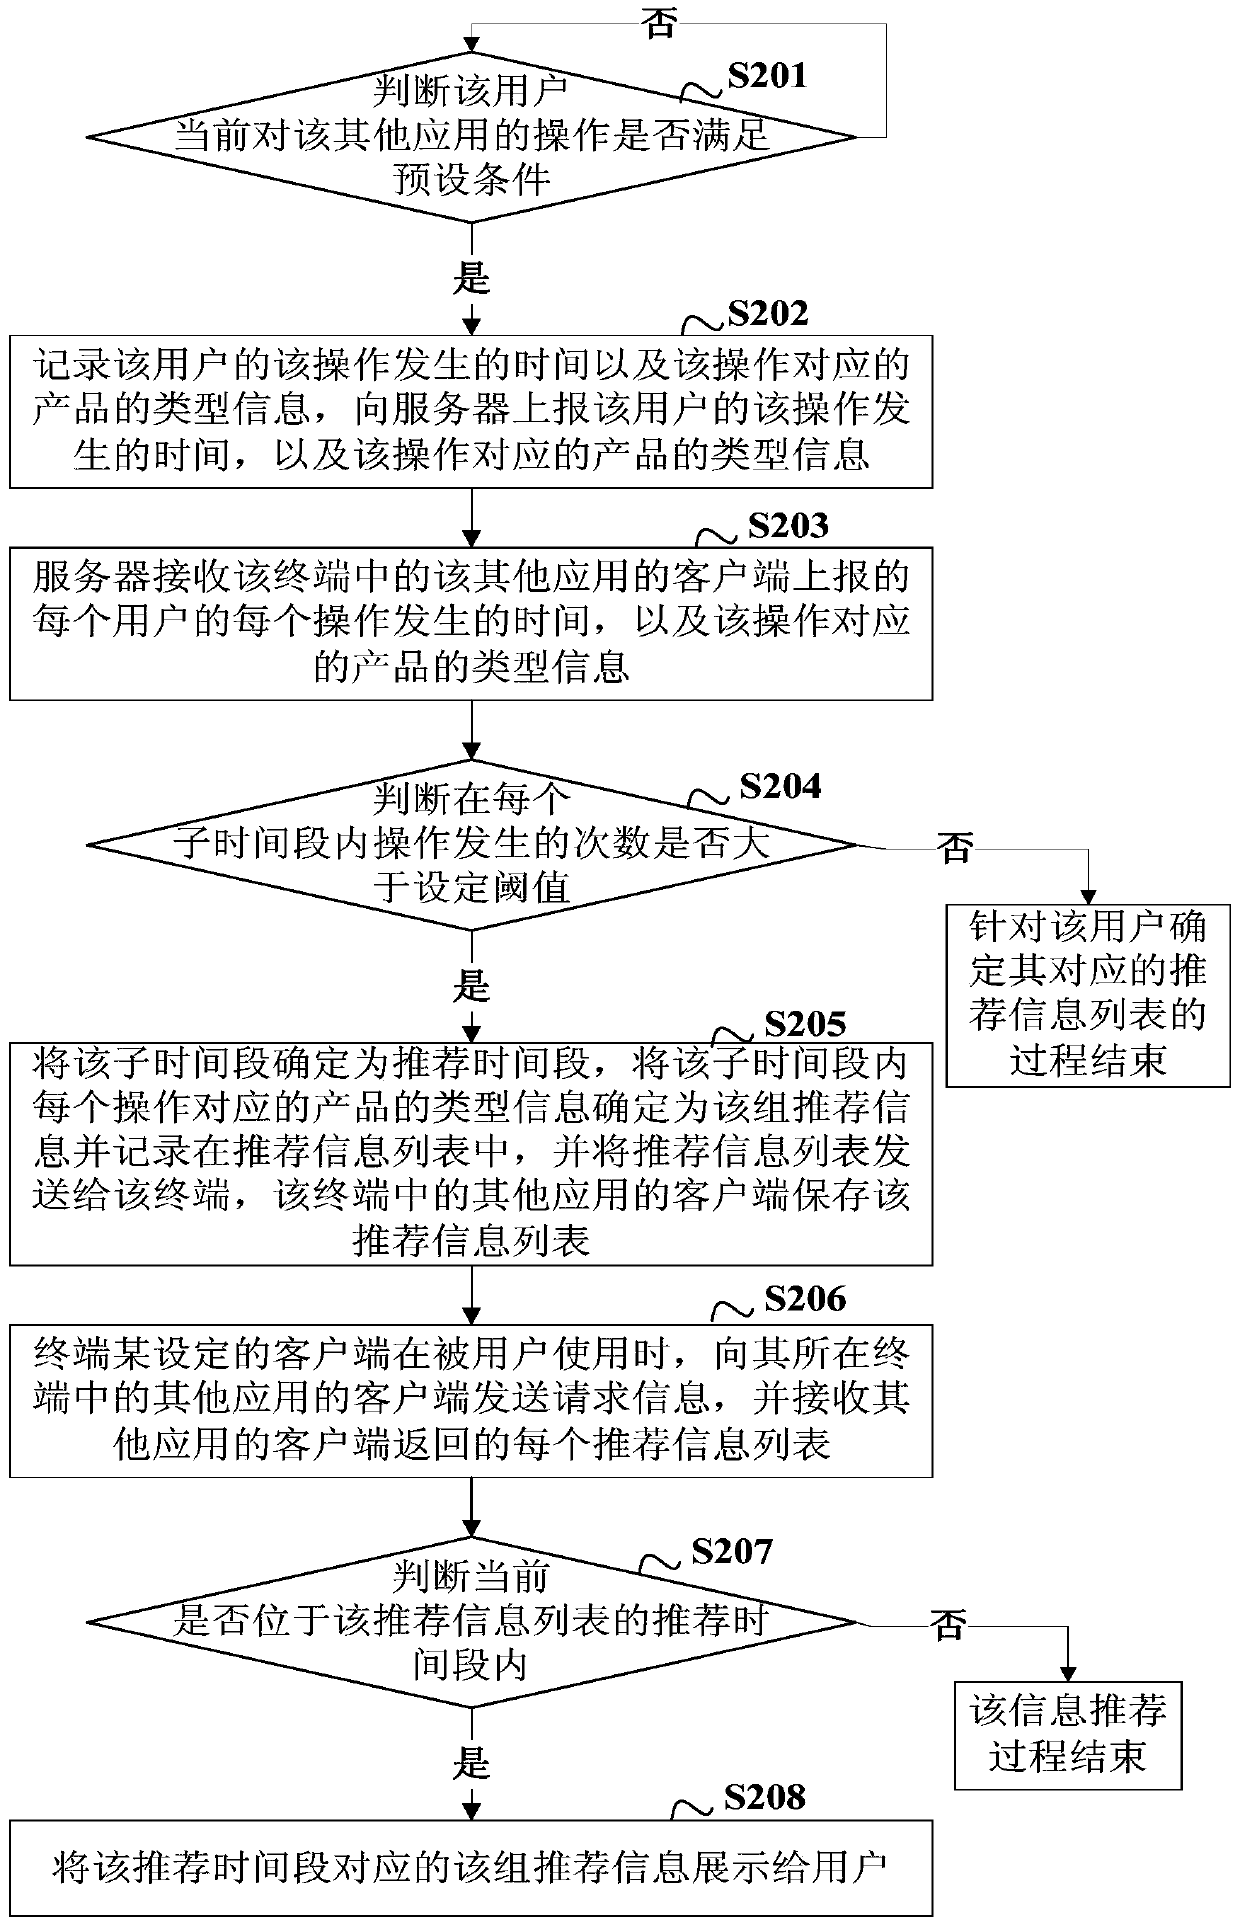 An information recommendation method, system and device